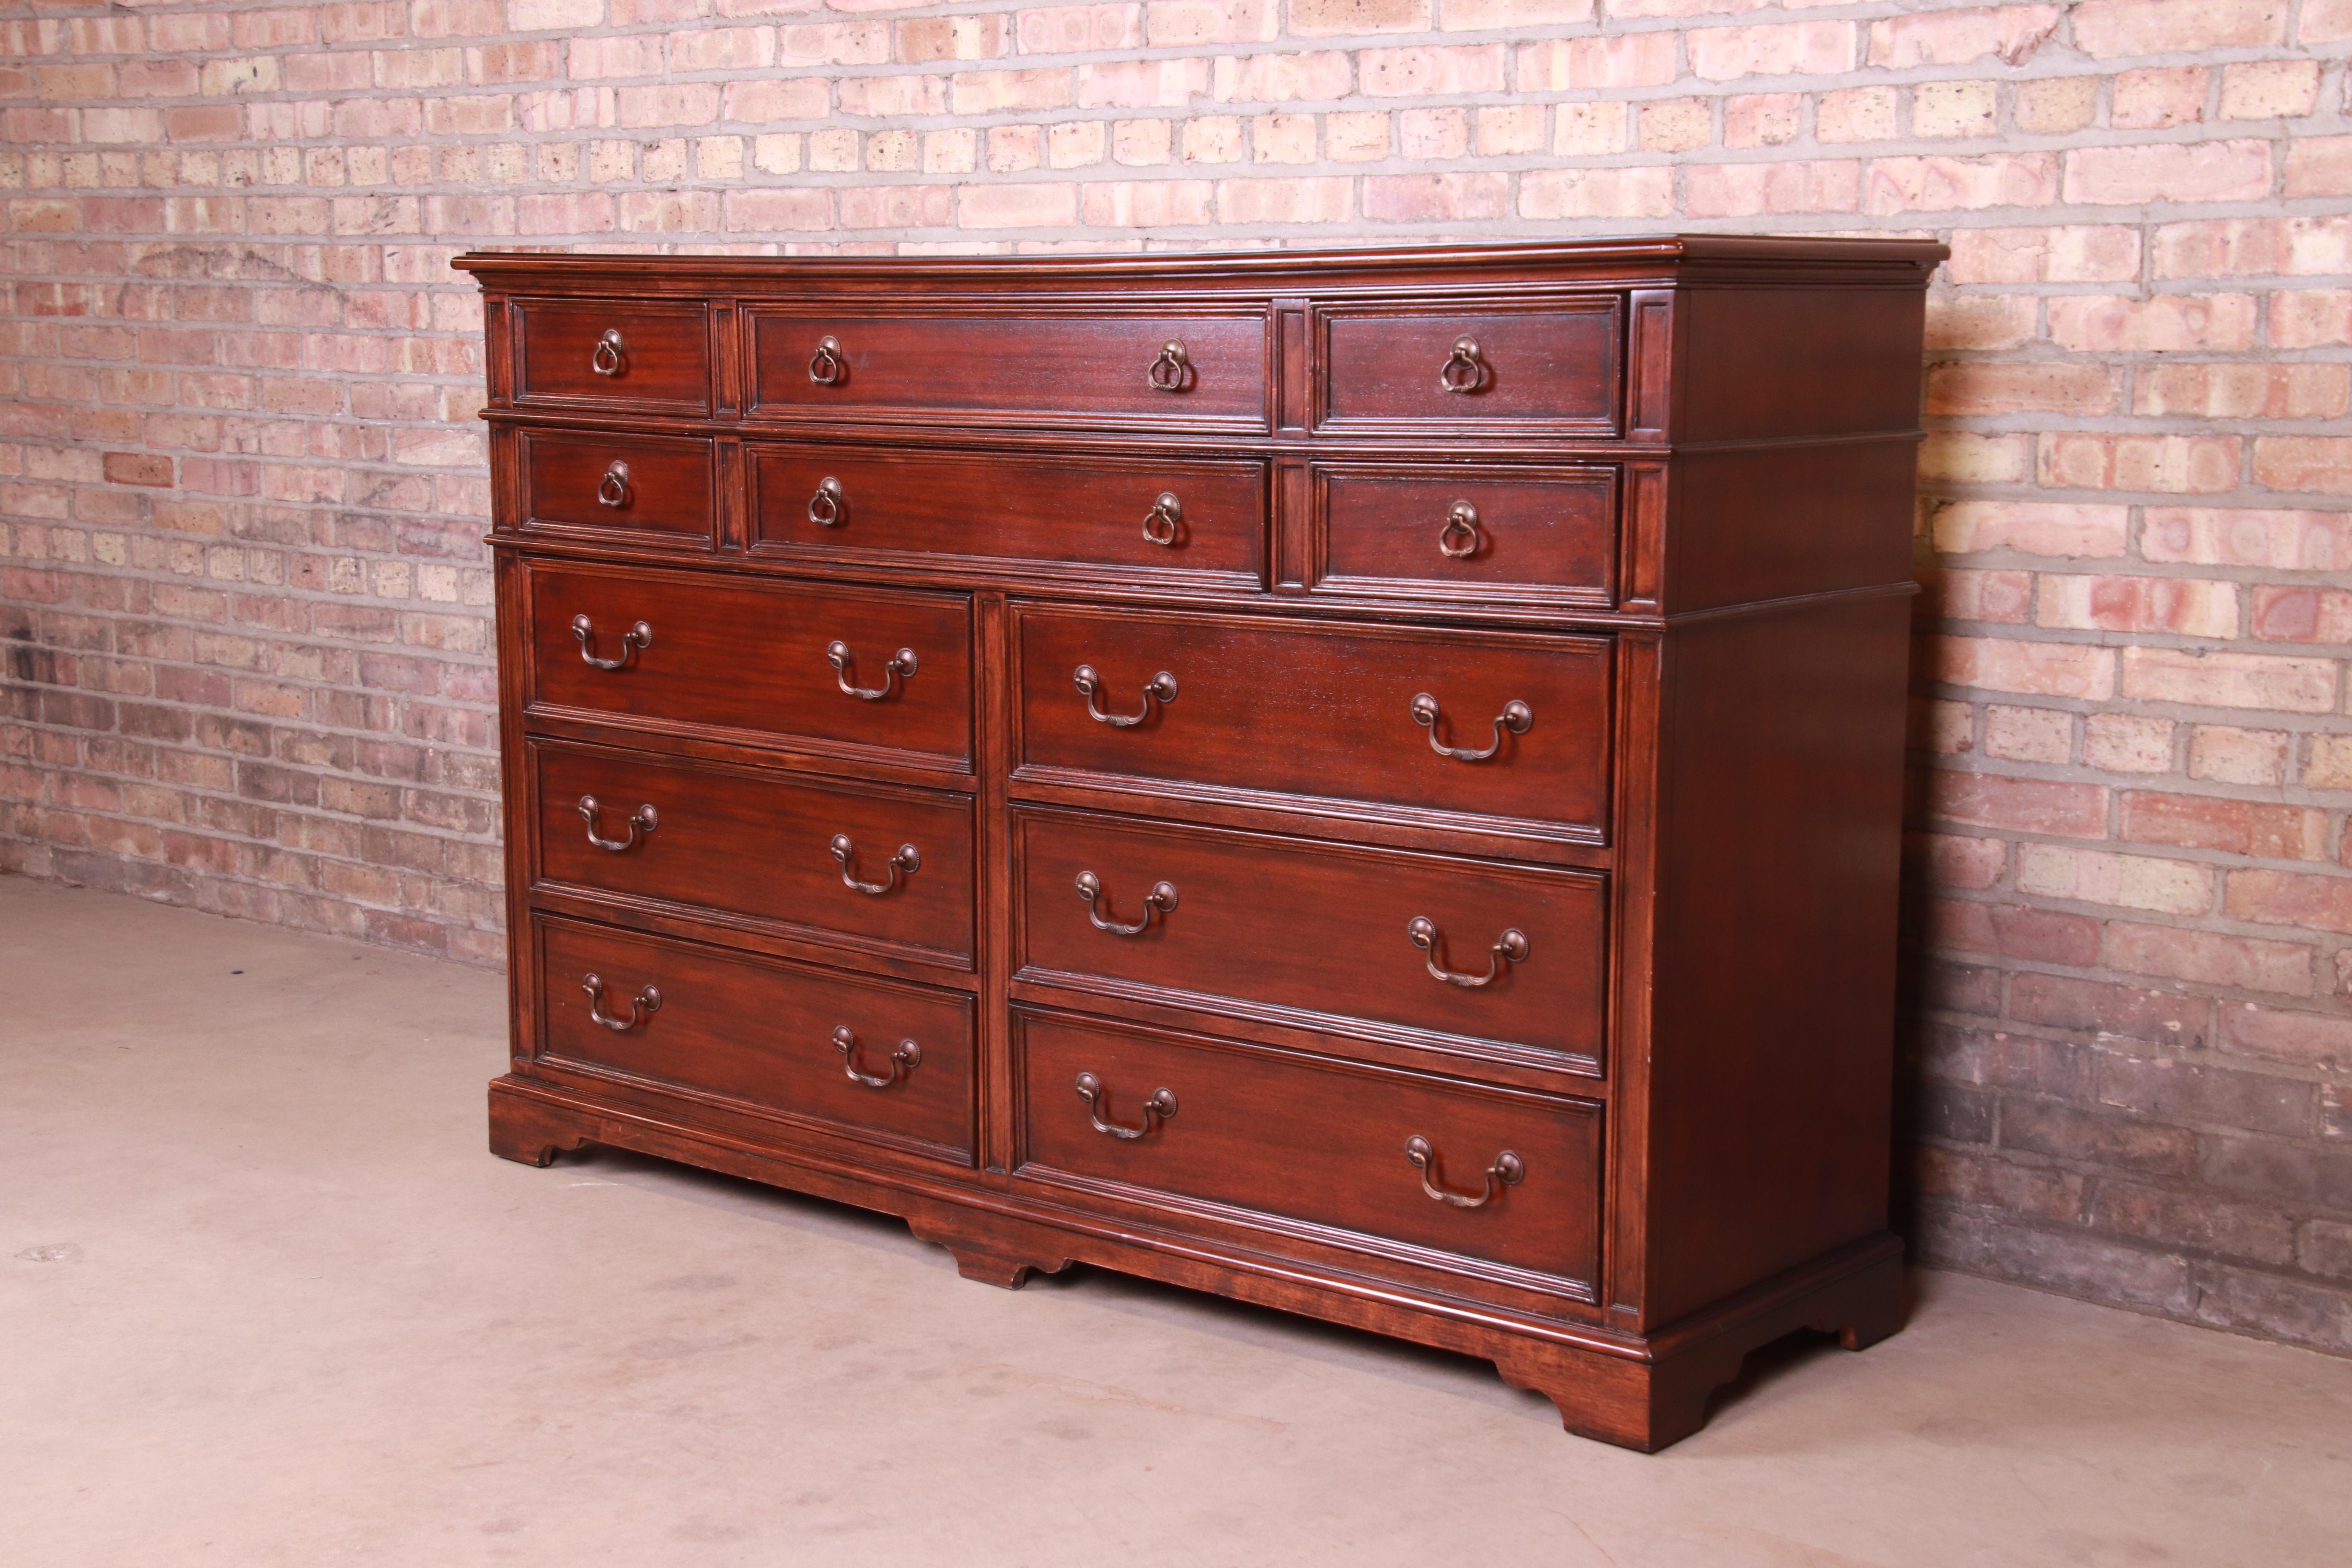 20th Century Drexel Heritage American Chippendale Style Mahogany Twelve-Drawer Dresser Chest